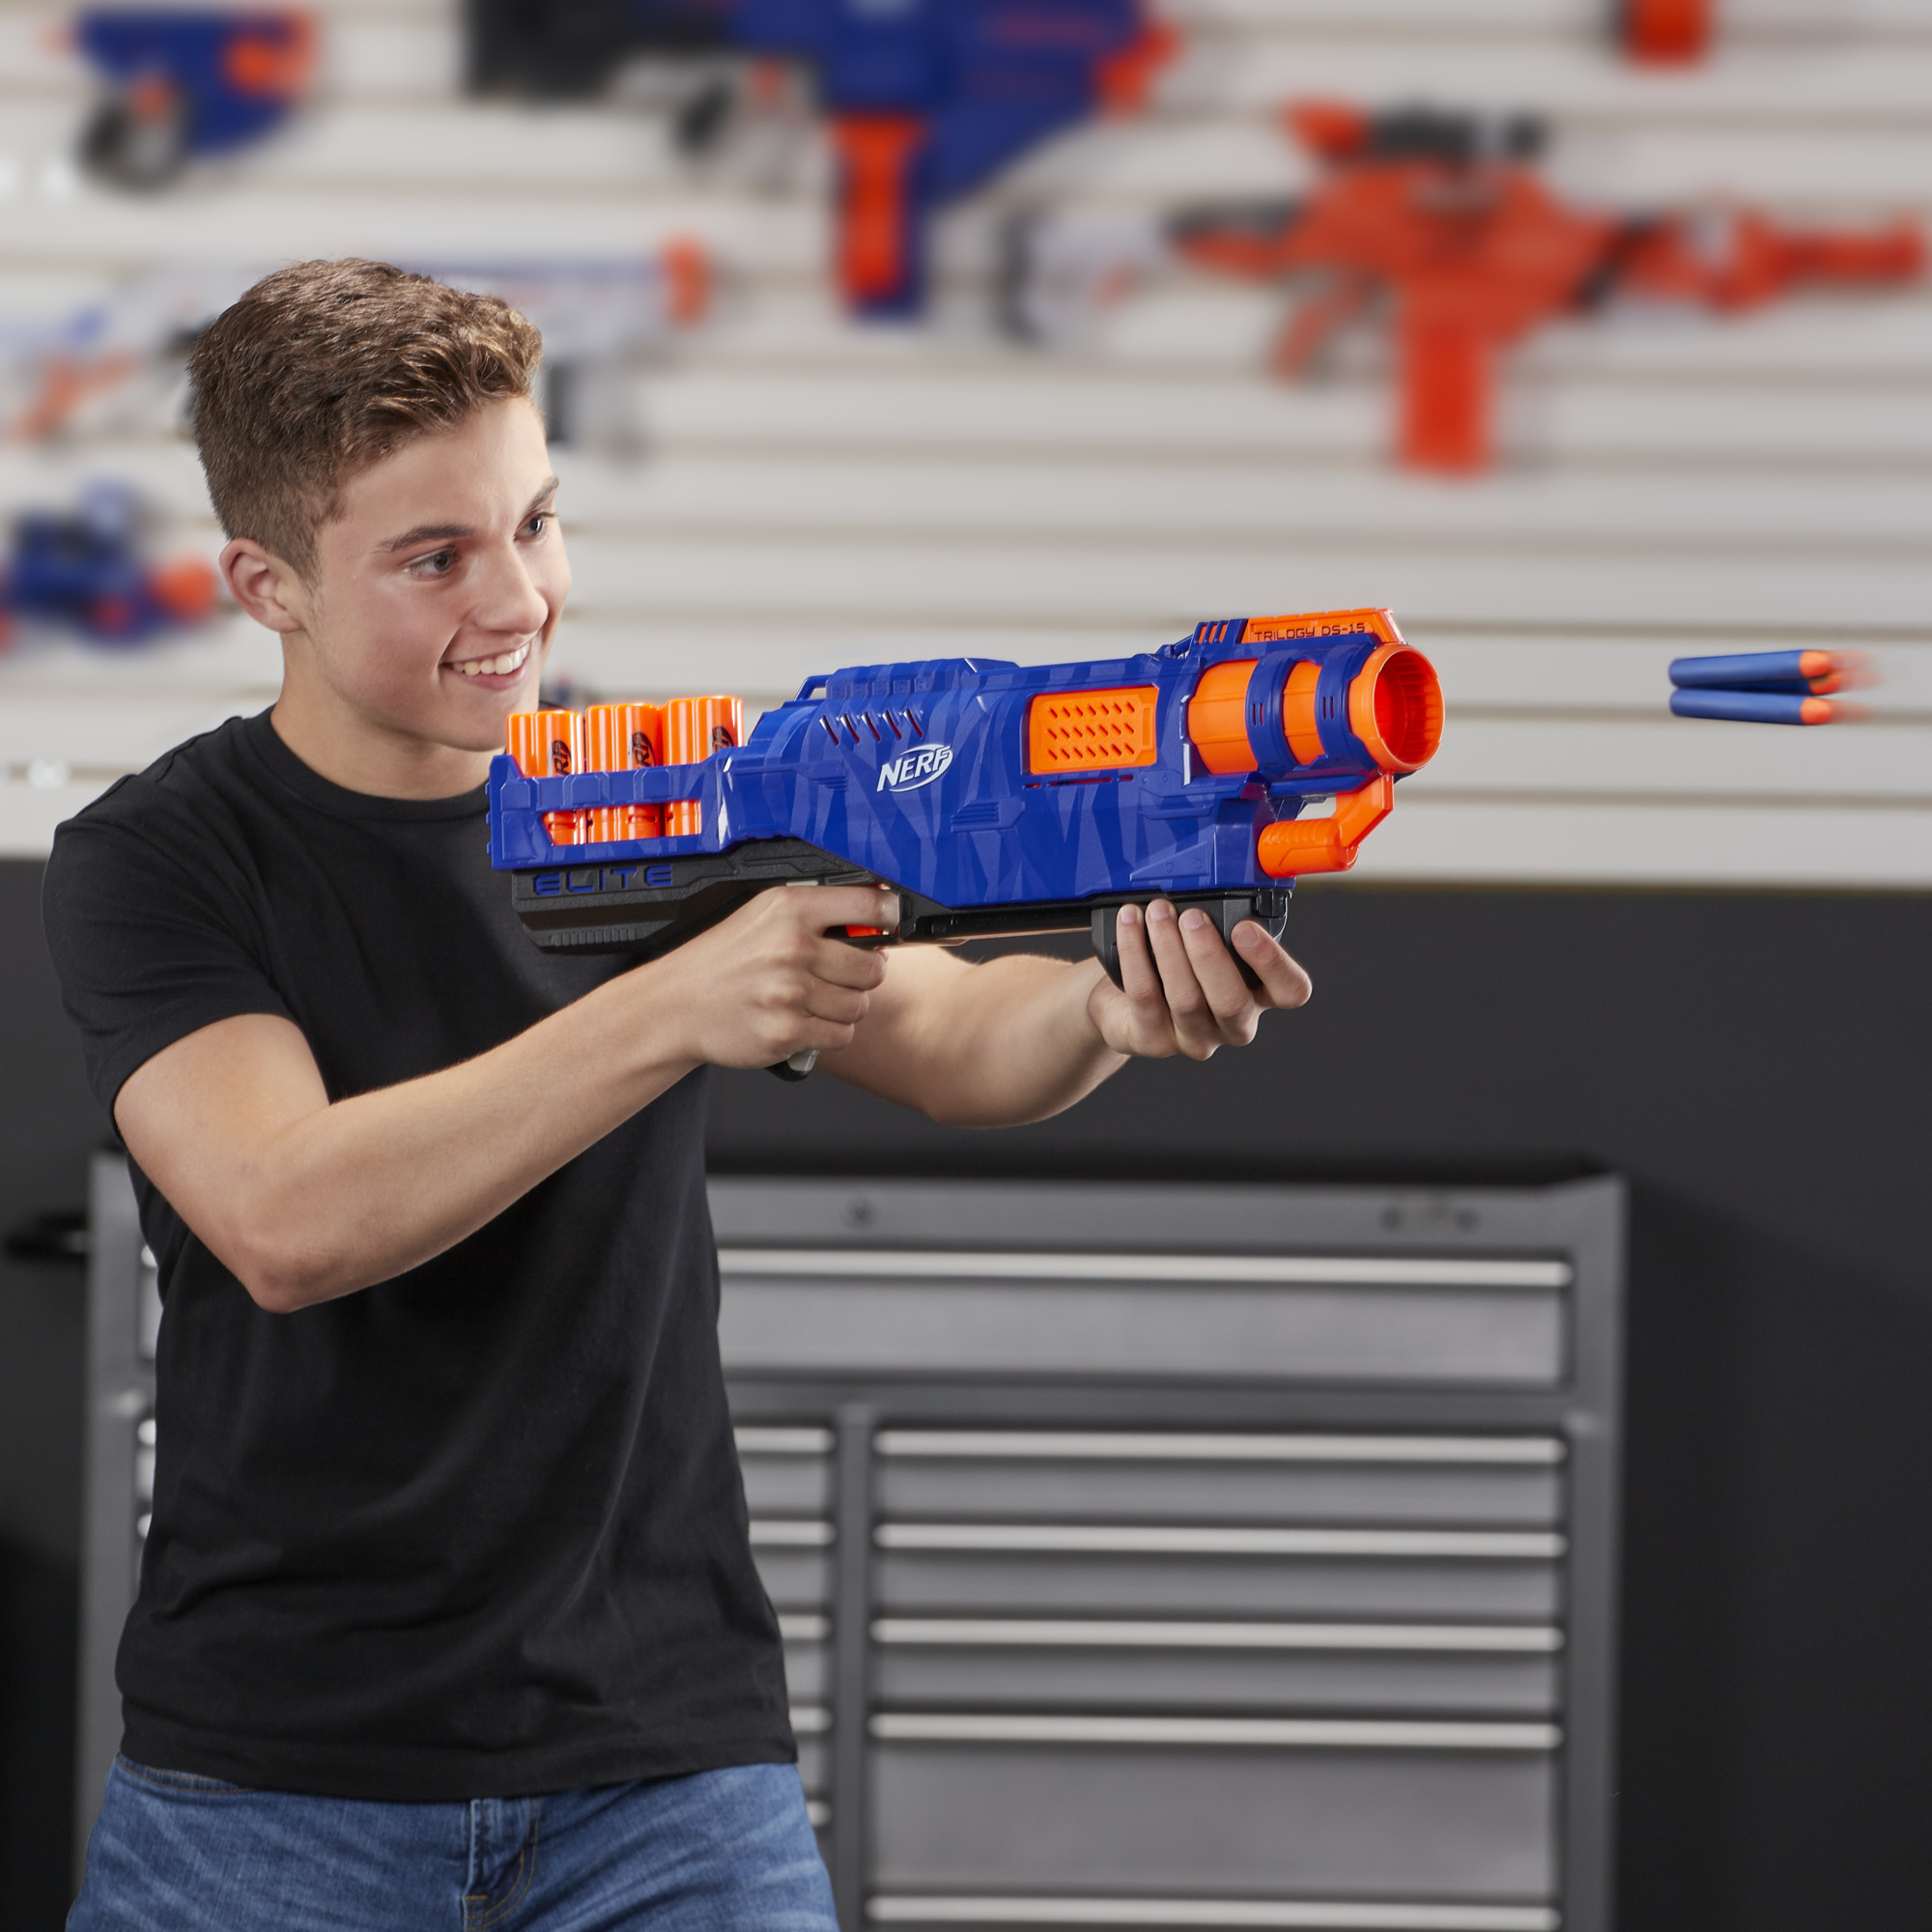 Trilogy DS-15 Nerf N-Strike Elite Toy Blaster with 15 Official Nerf Elite Darts and 5 Shells – For Kids, Teens, Adults - image 4 of 11